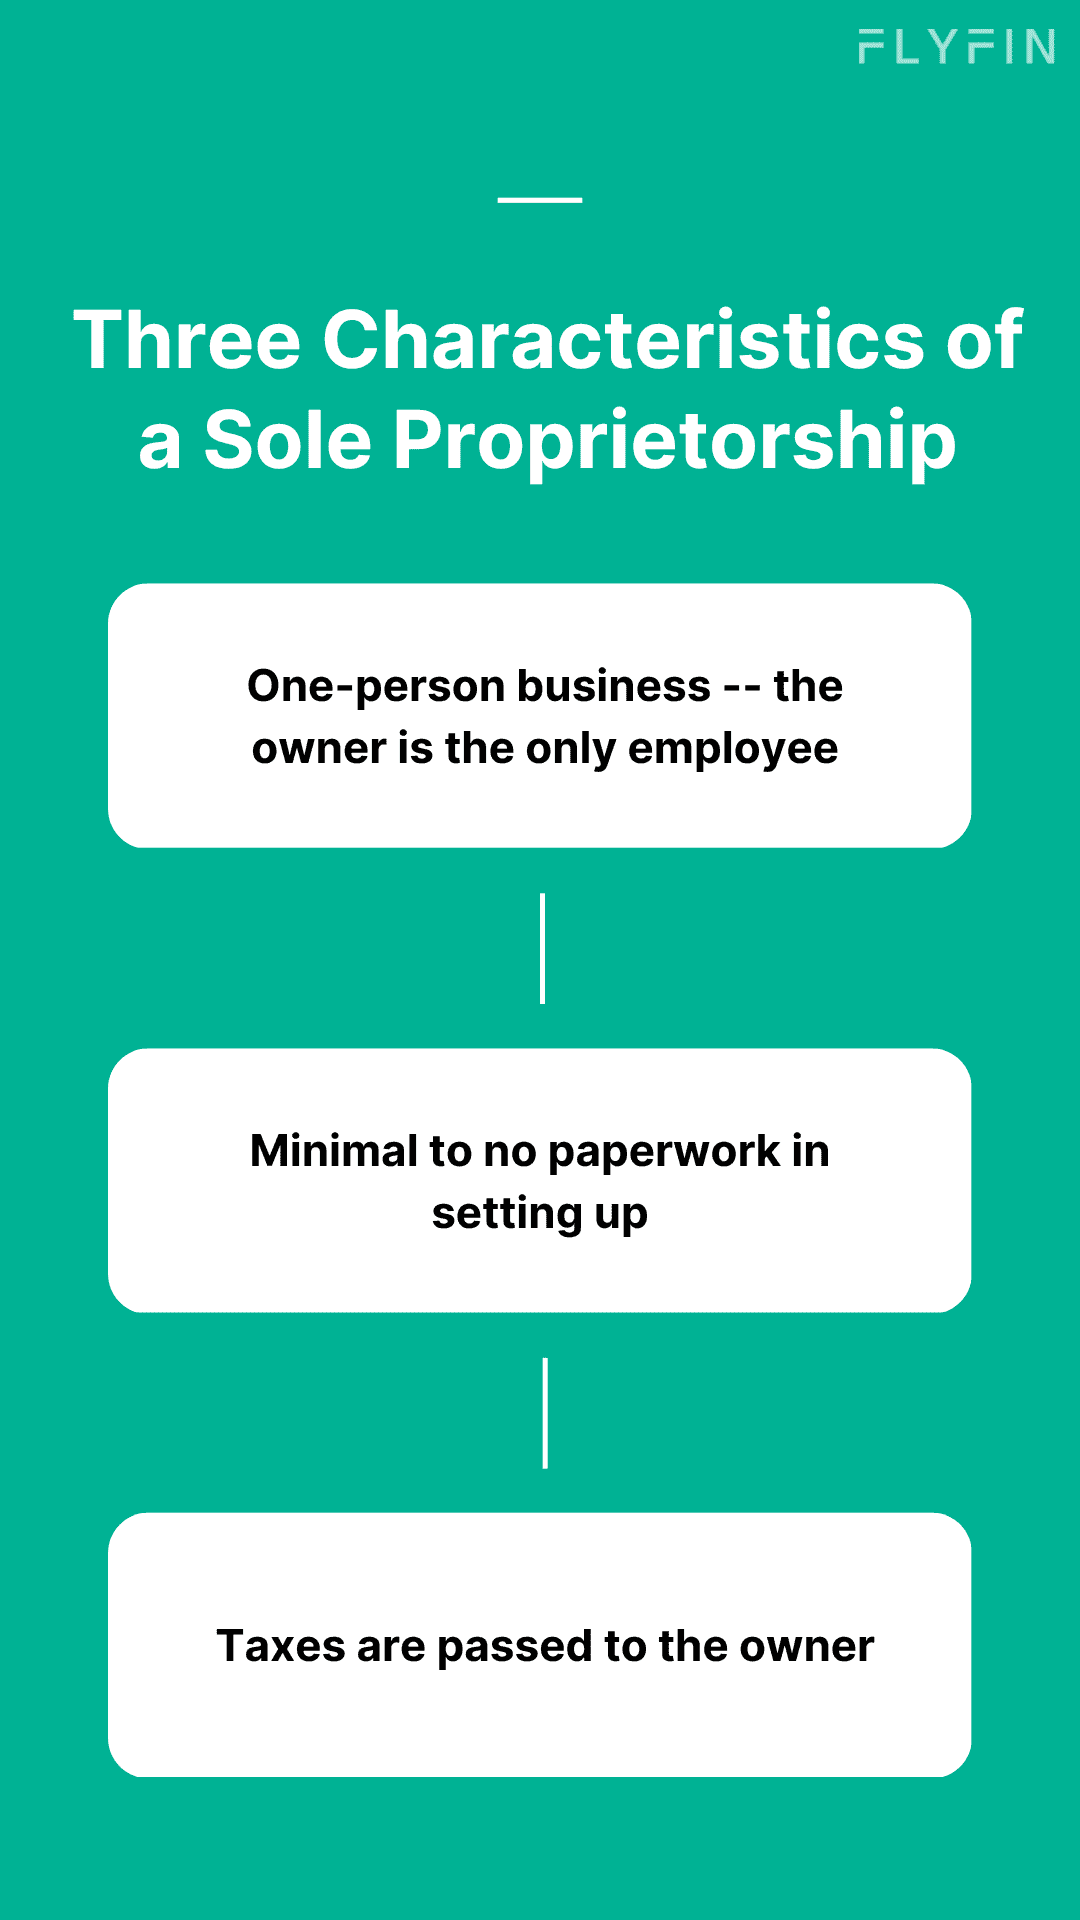 Image describing the three characteristics of a sole proprietorship - one-person business, minimal paperwork, and taxes passed to the owner. #selfemployed #taxes